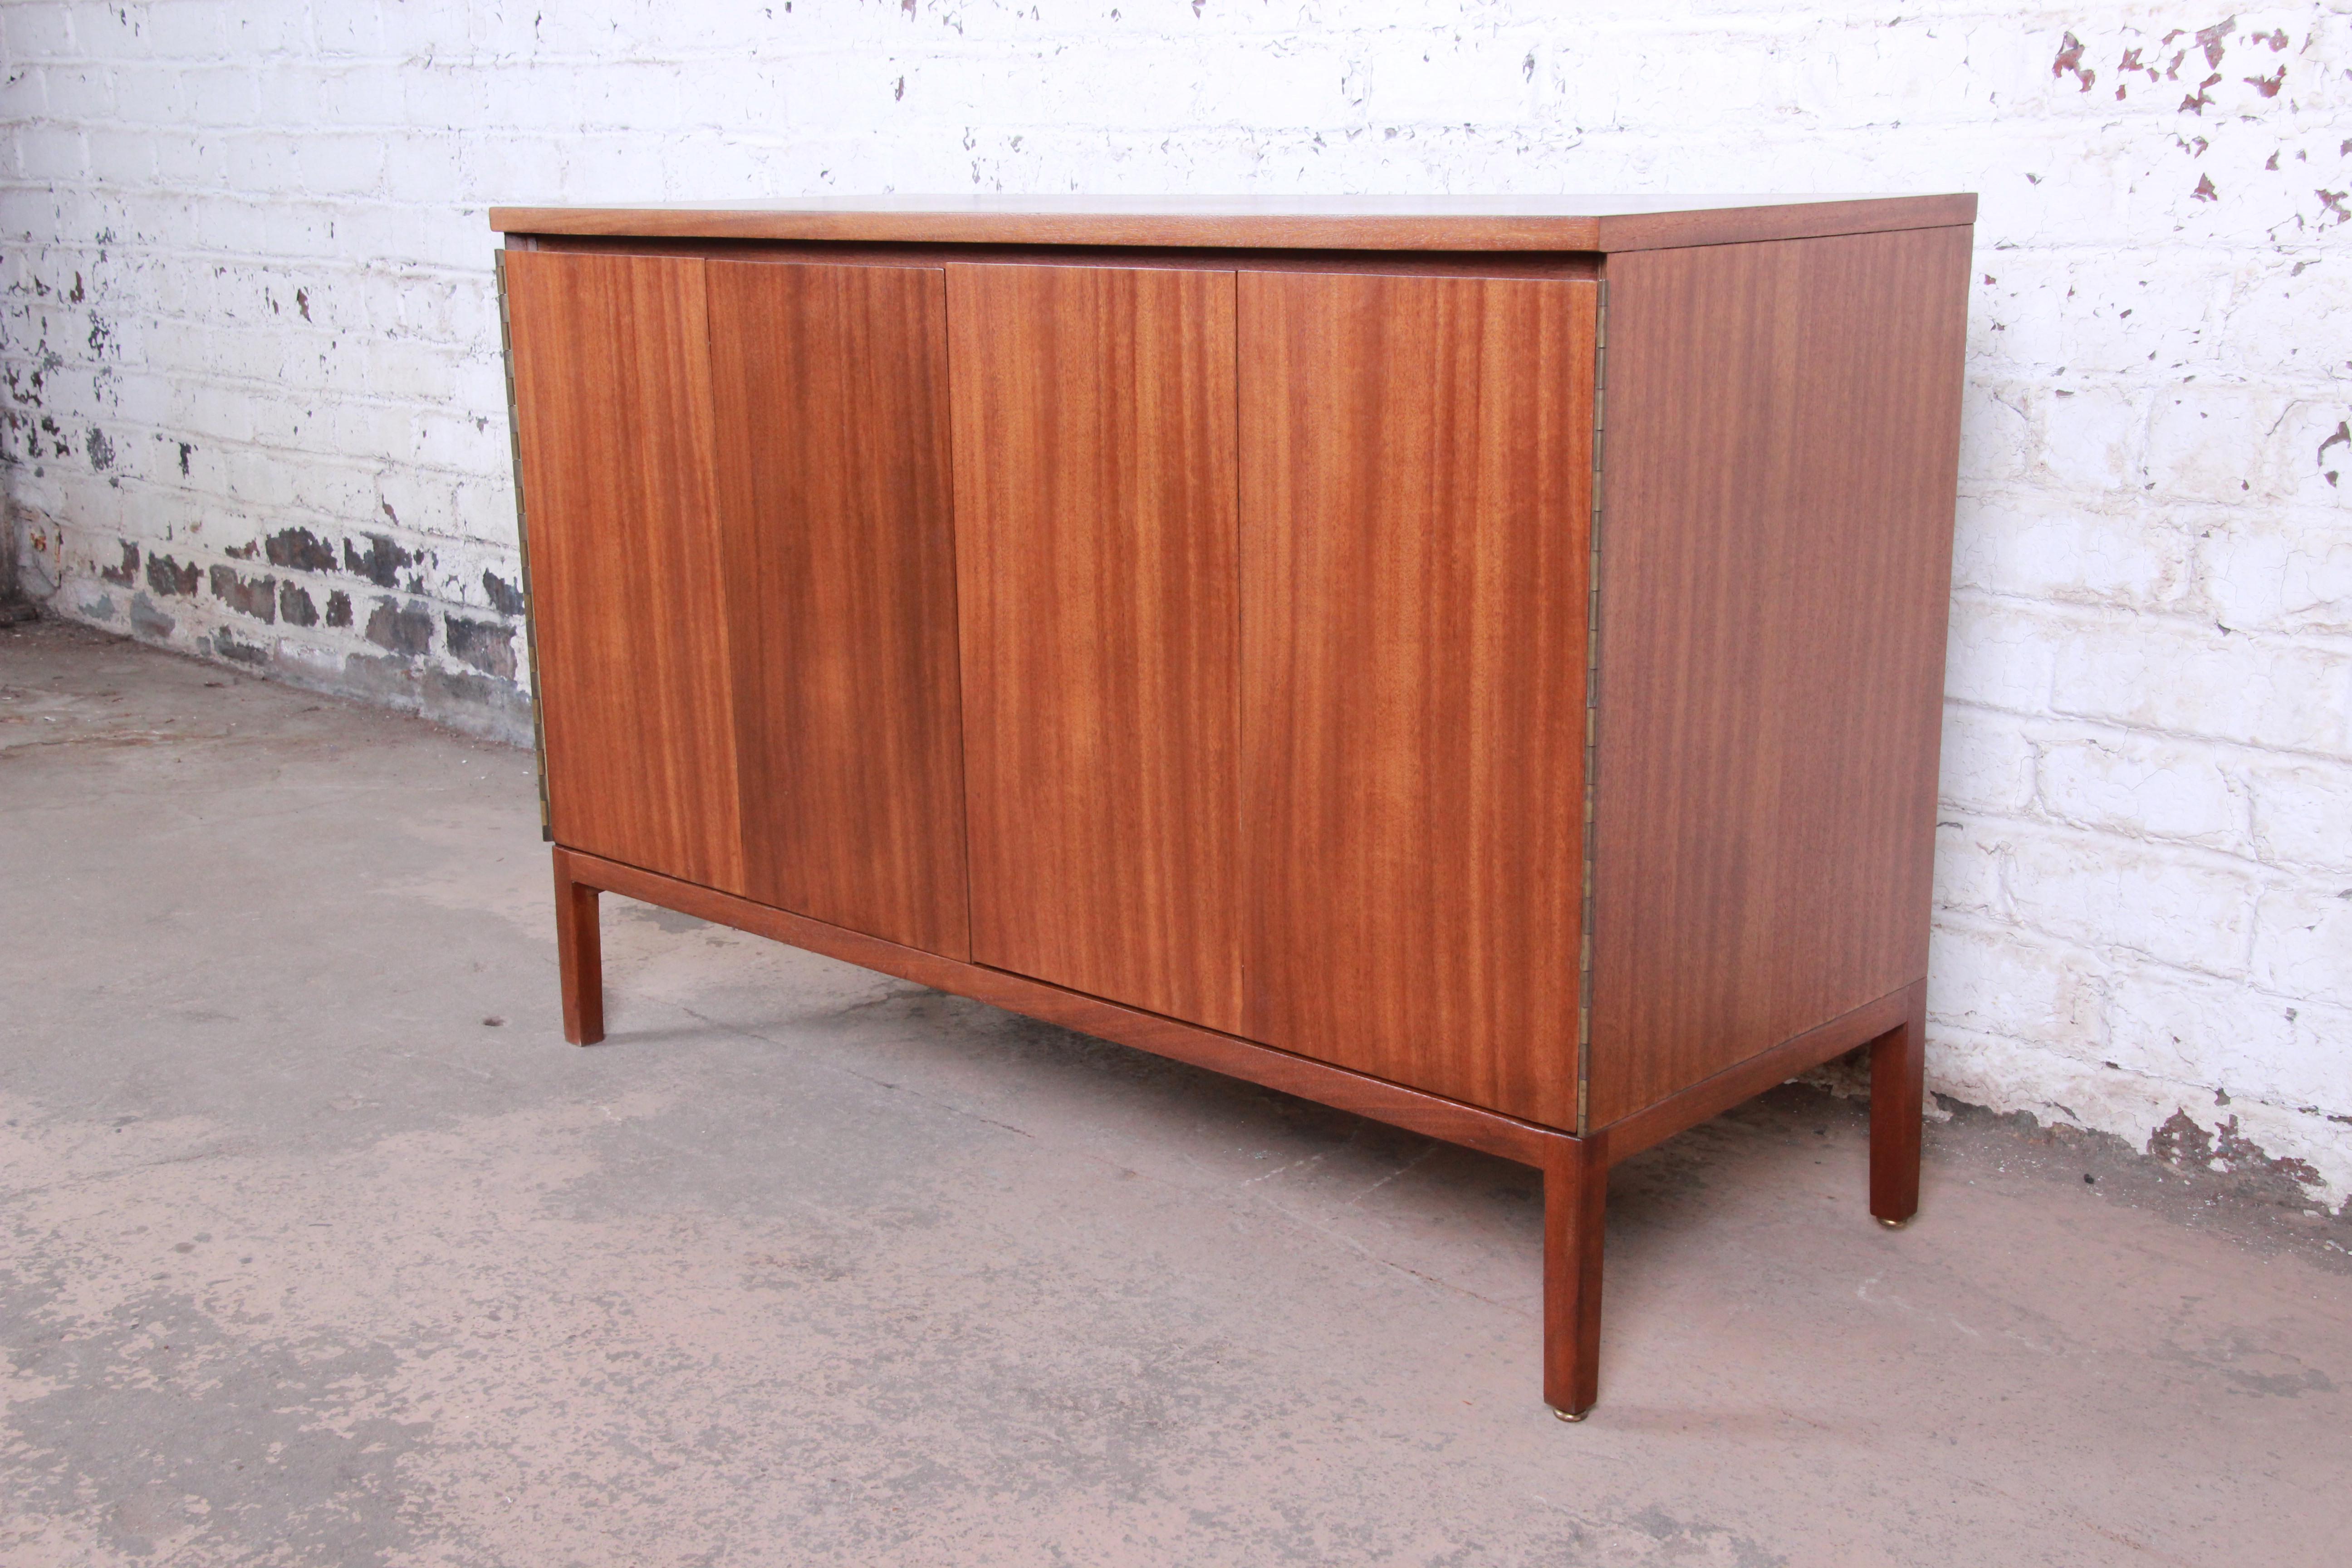 An exceptional Mid-Century Modern sideboard or bar cabinet designed by Paul McCobb for his Irwin Collection line for Calvin Furniture. The cabinet features stunning Honduran mahogany wood grain and sleek mid-century lines. An excellent example of